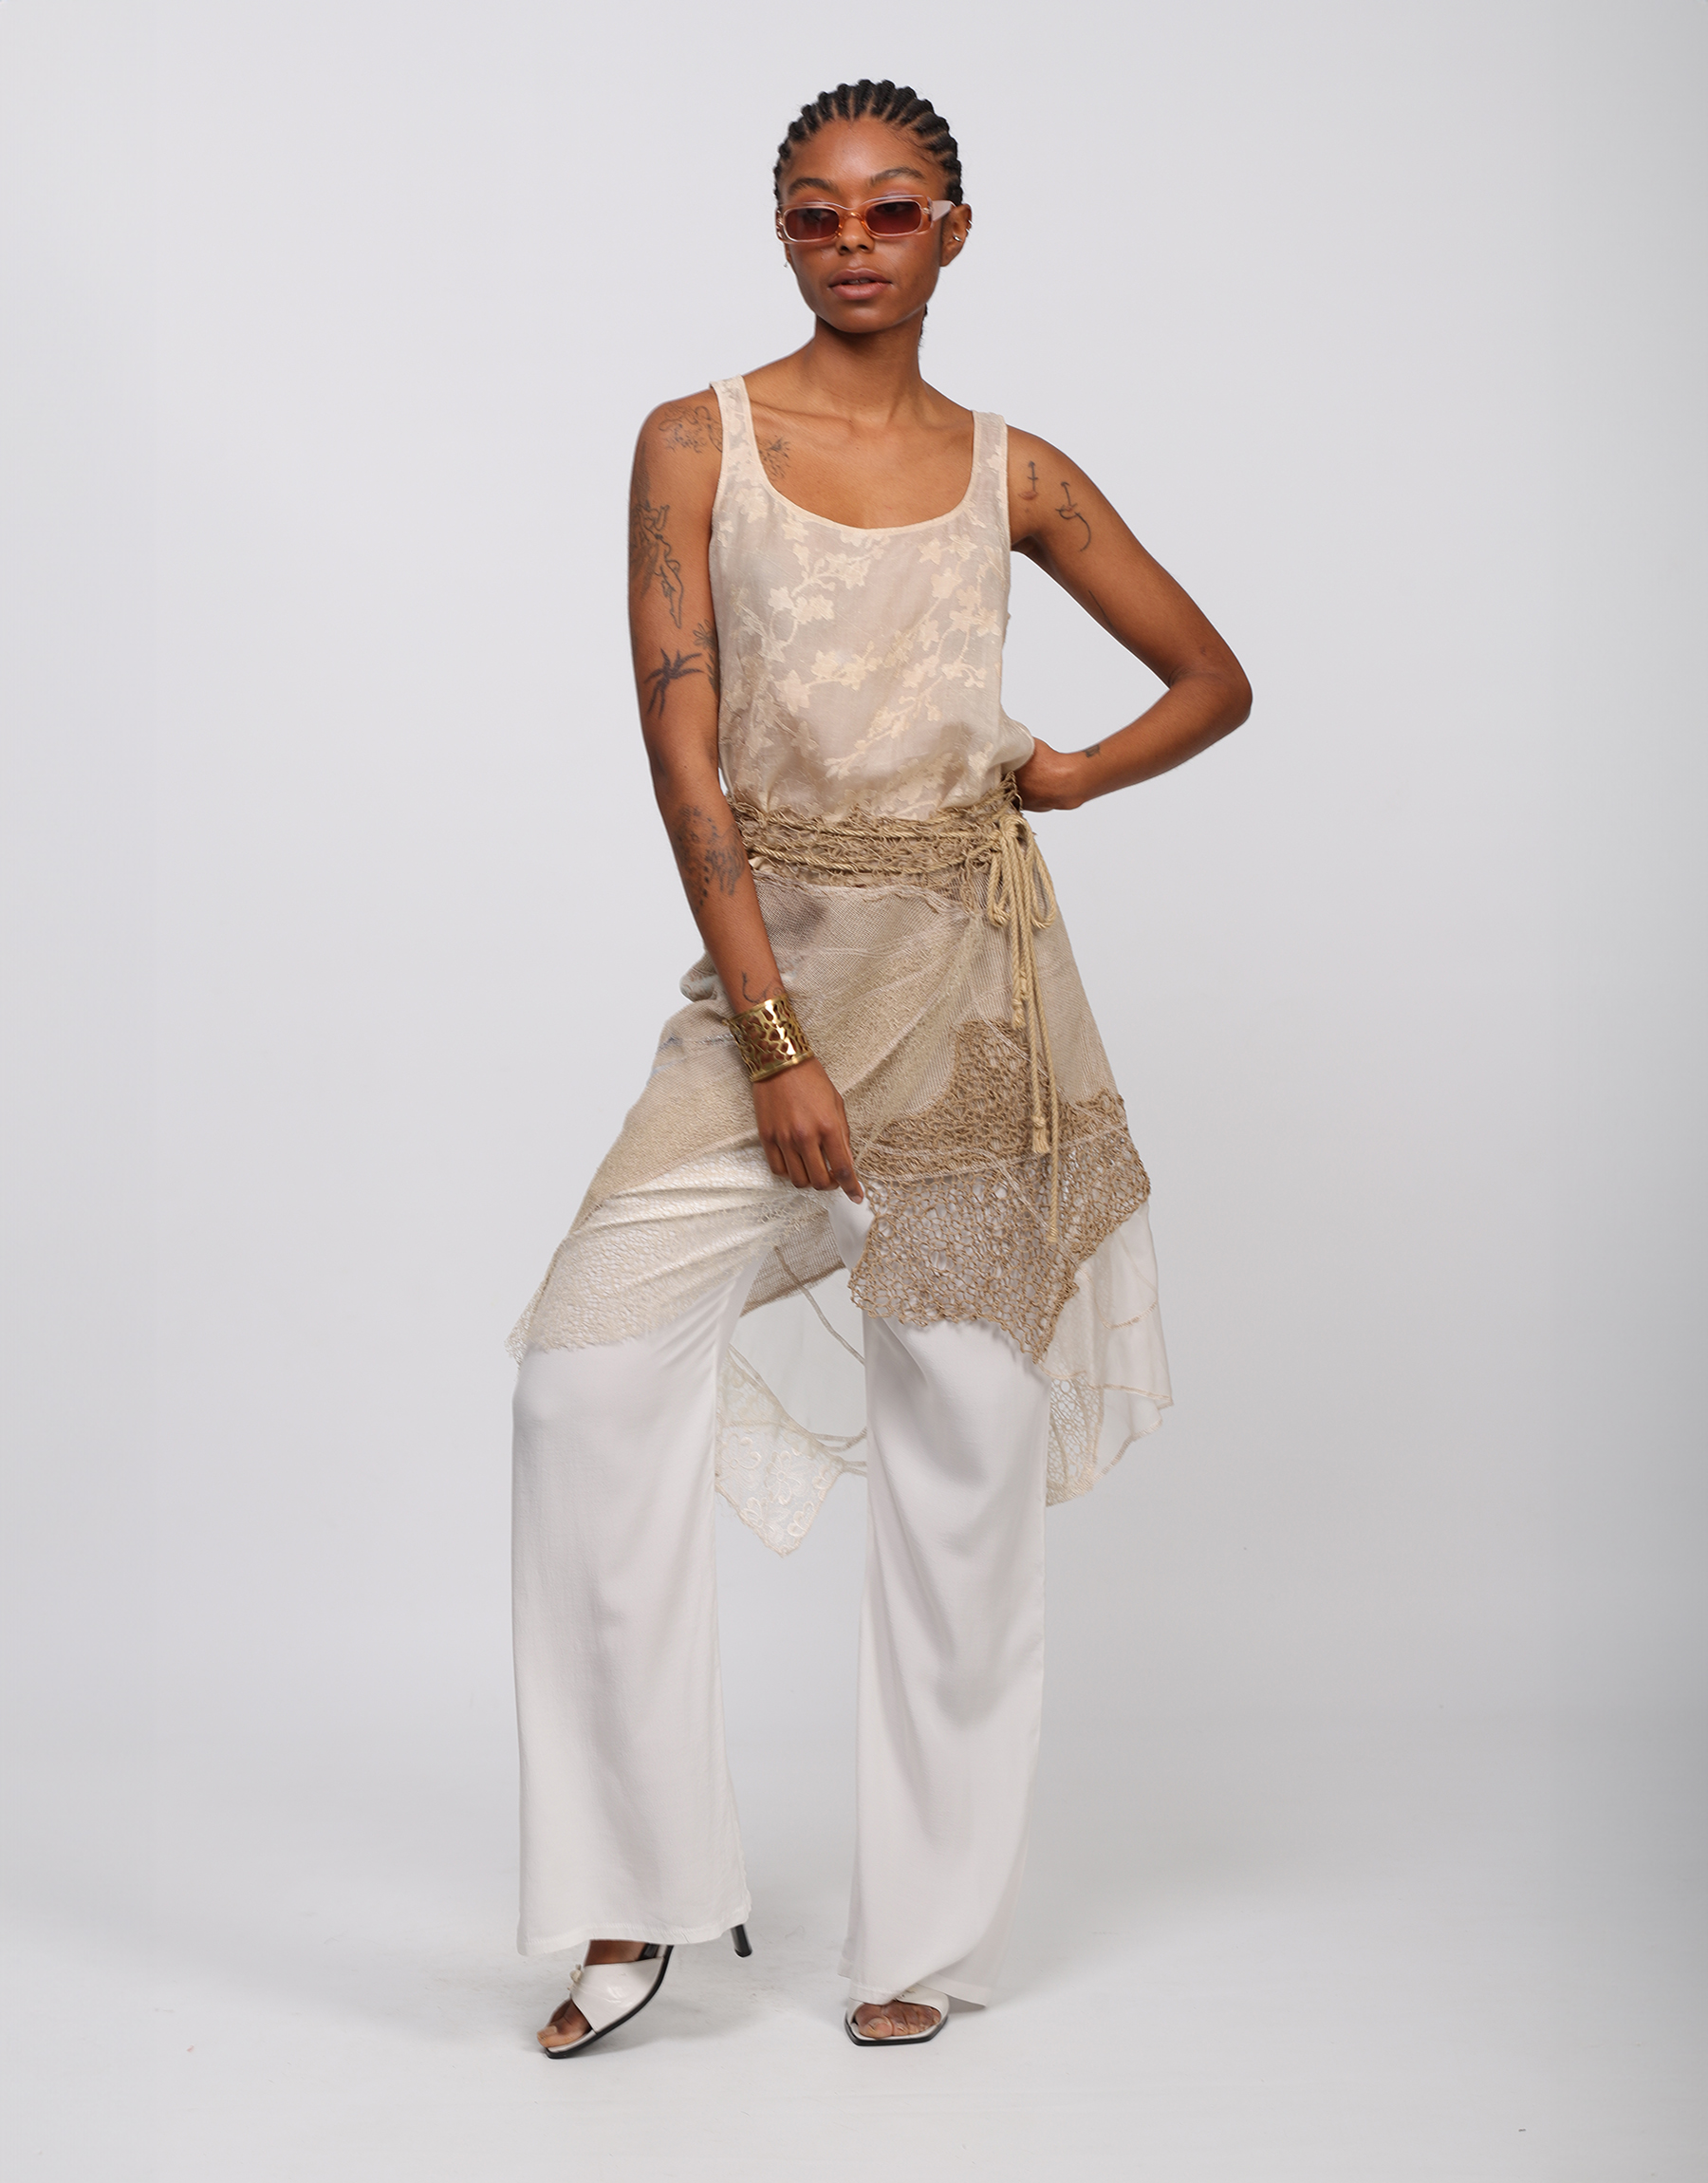 Wrap skirt in beige, ivory embroidered patchwork mesh and knitted string